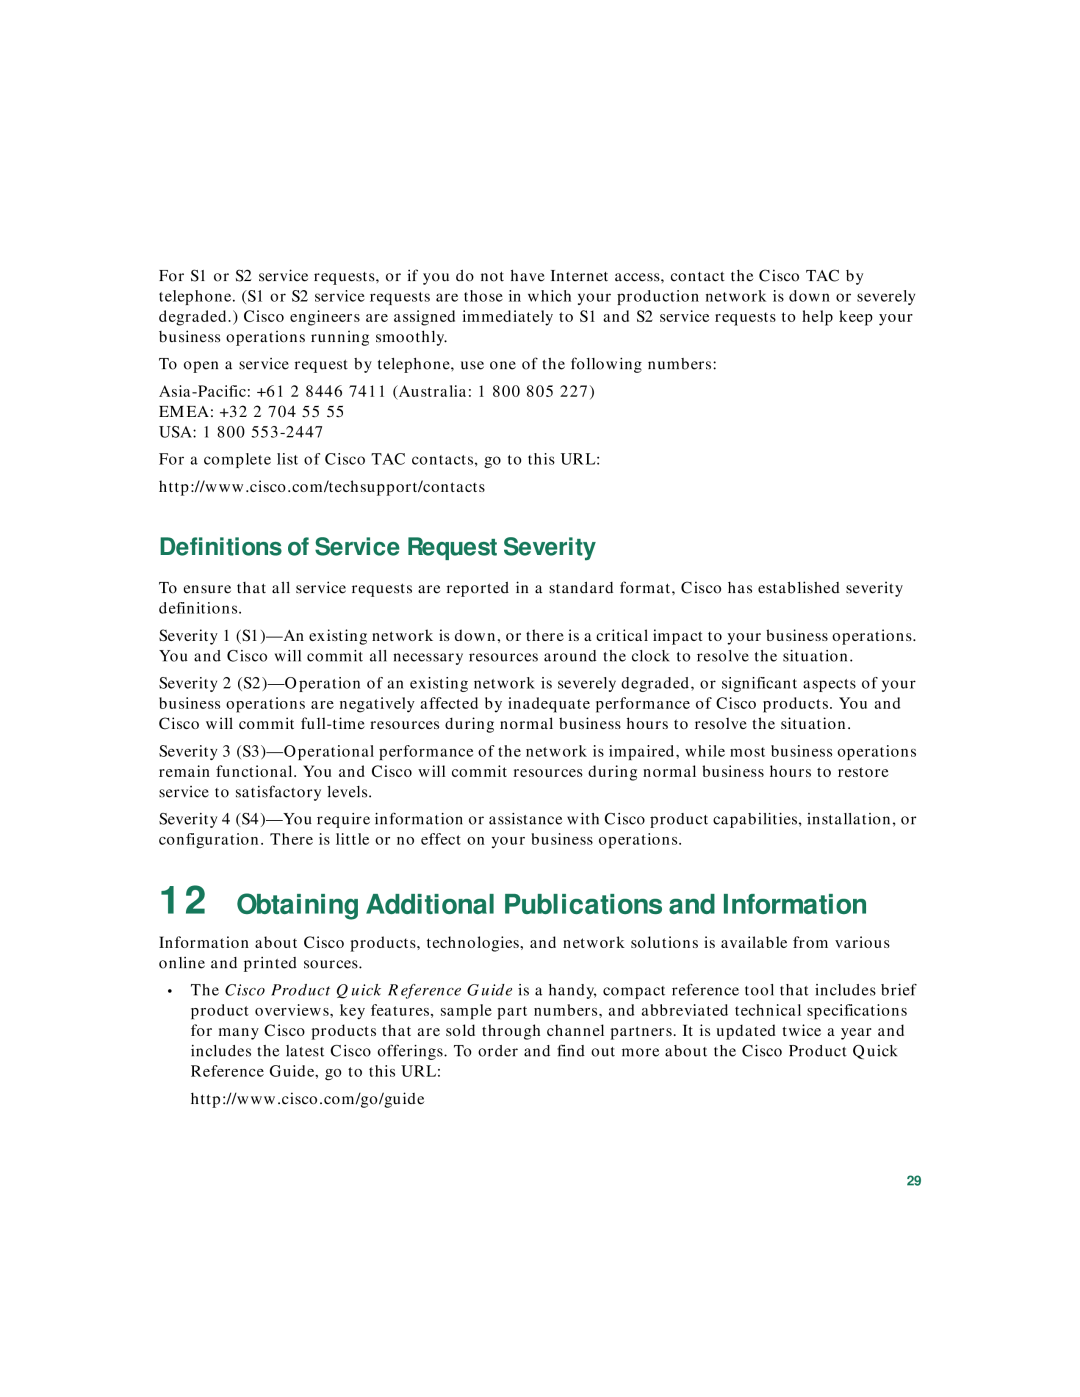 Cisco Systems 3020 warranty Definitions of Service Request Severity, Obtaining Additional Publications and Information 